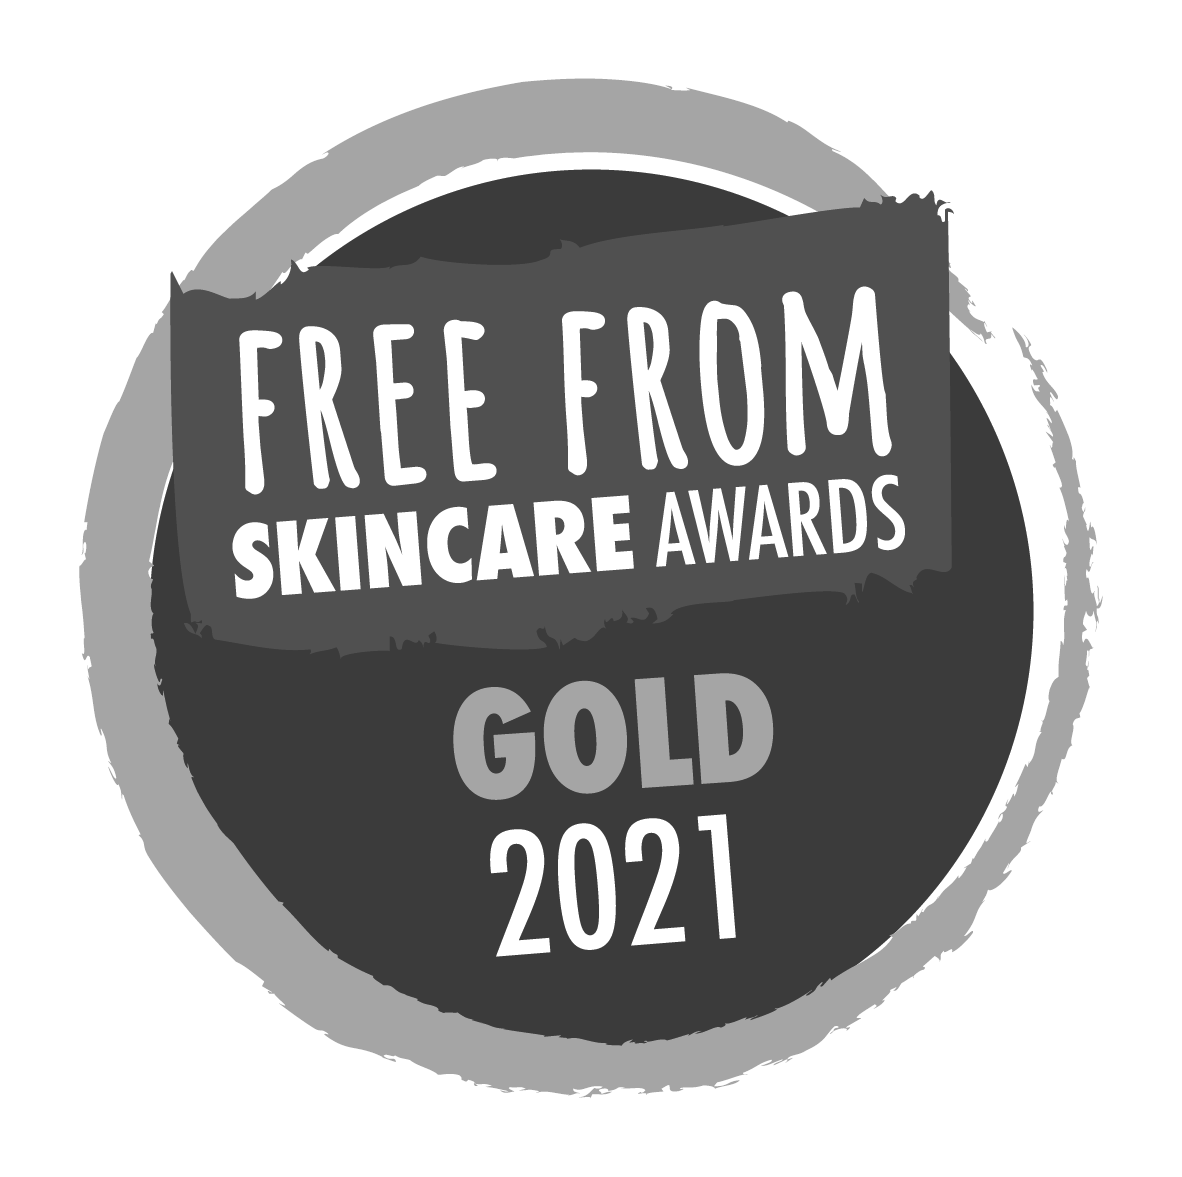 Free From Skincare Awards - GOLD - 2021